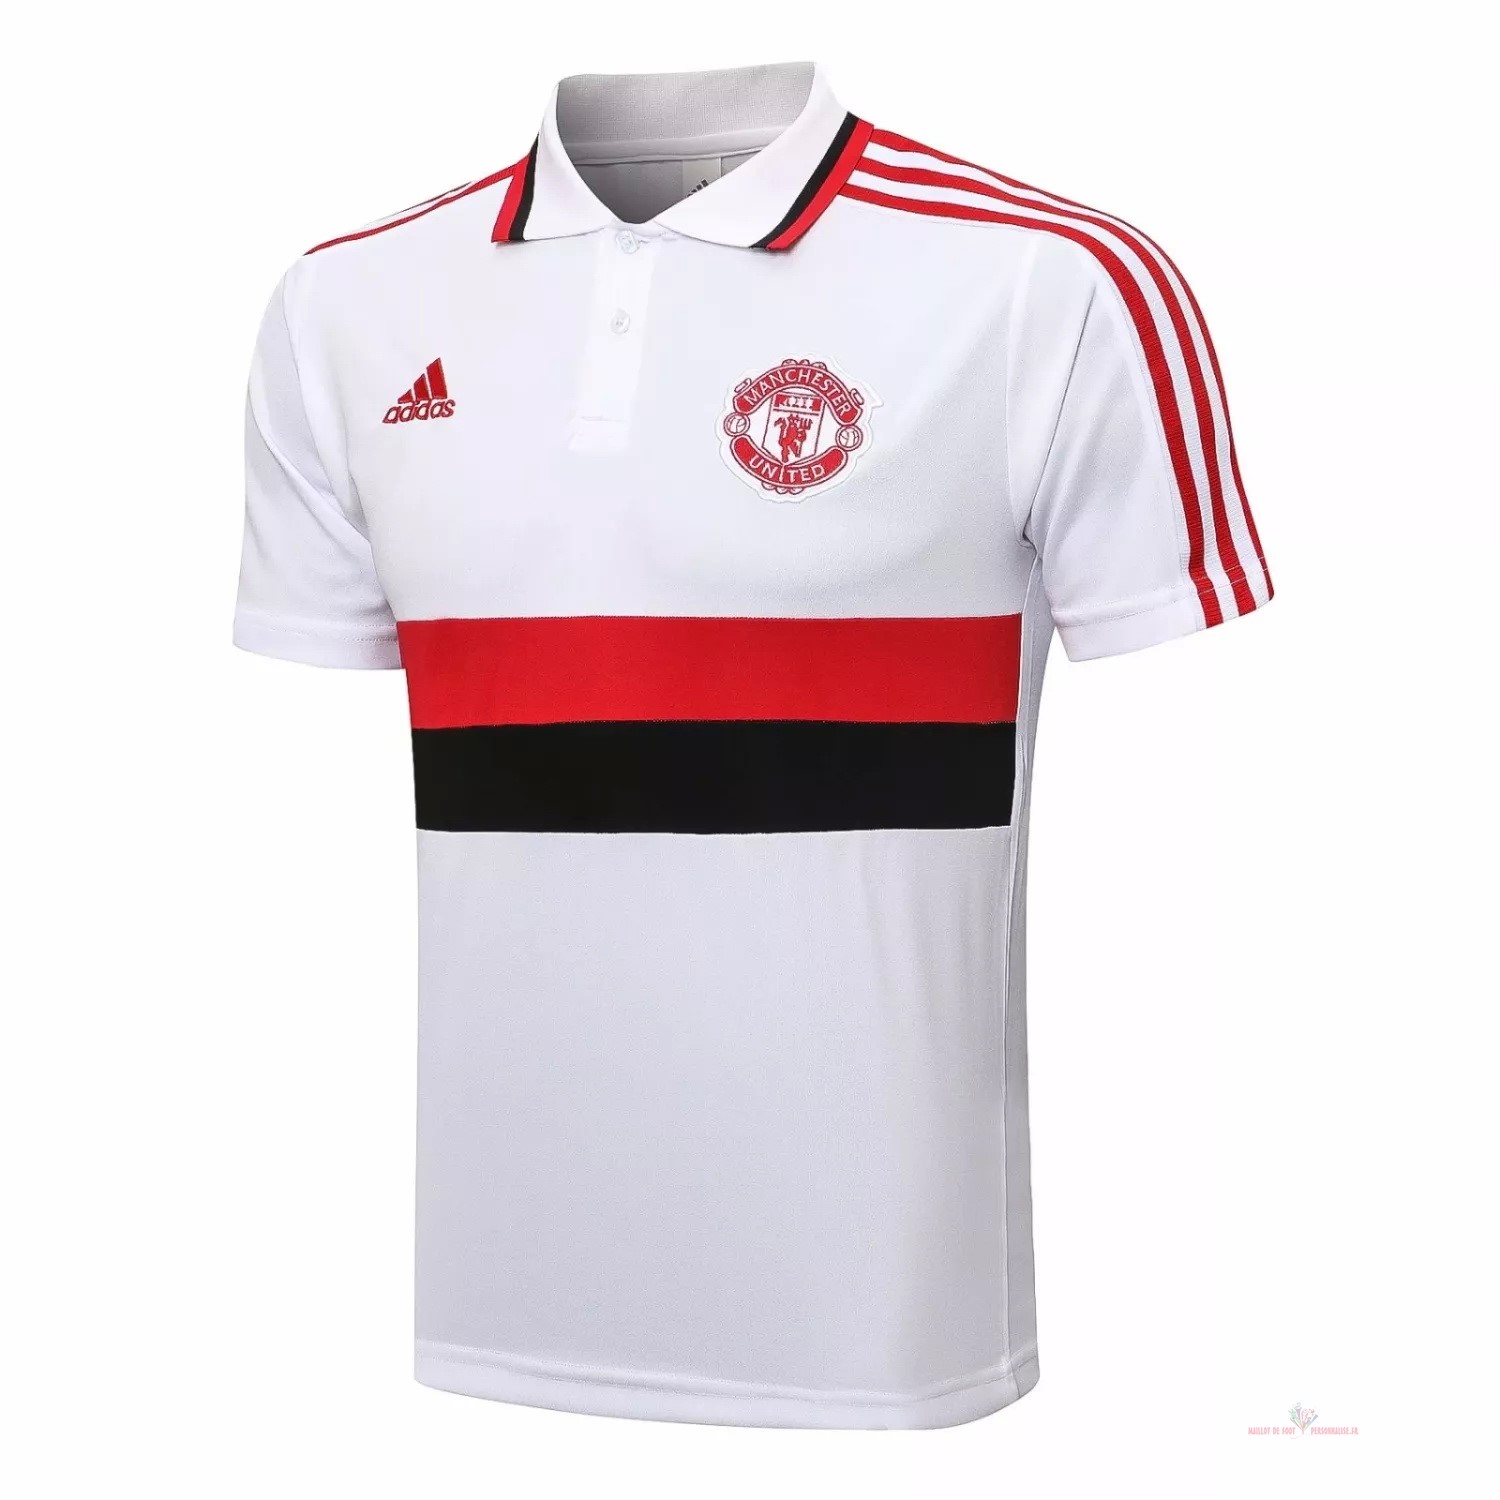 Maillot Om Pas Cher adidas Polo Manchester United 2021 2022 Blanc Noir Rouge